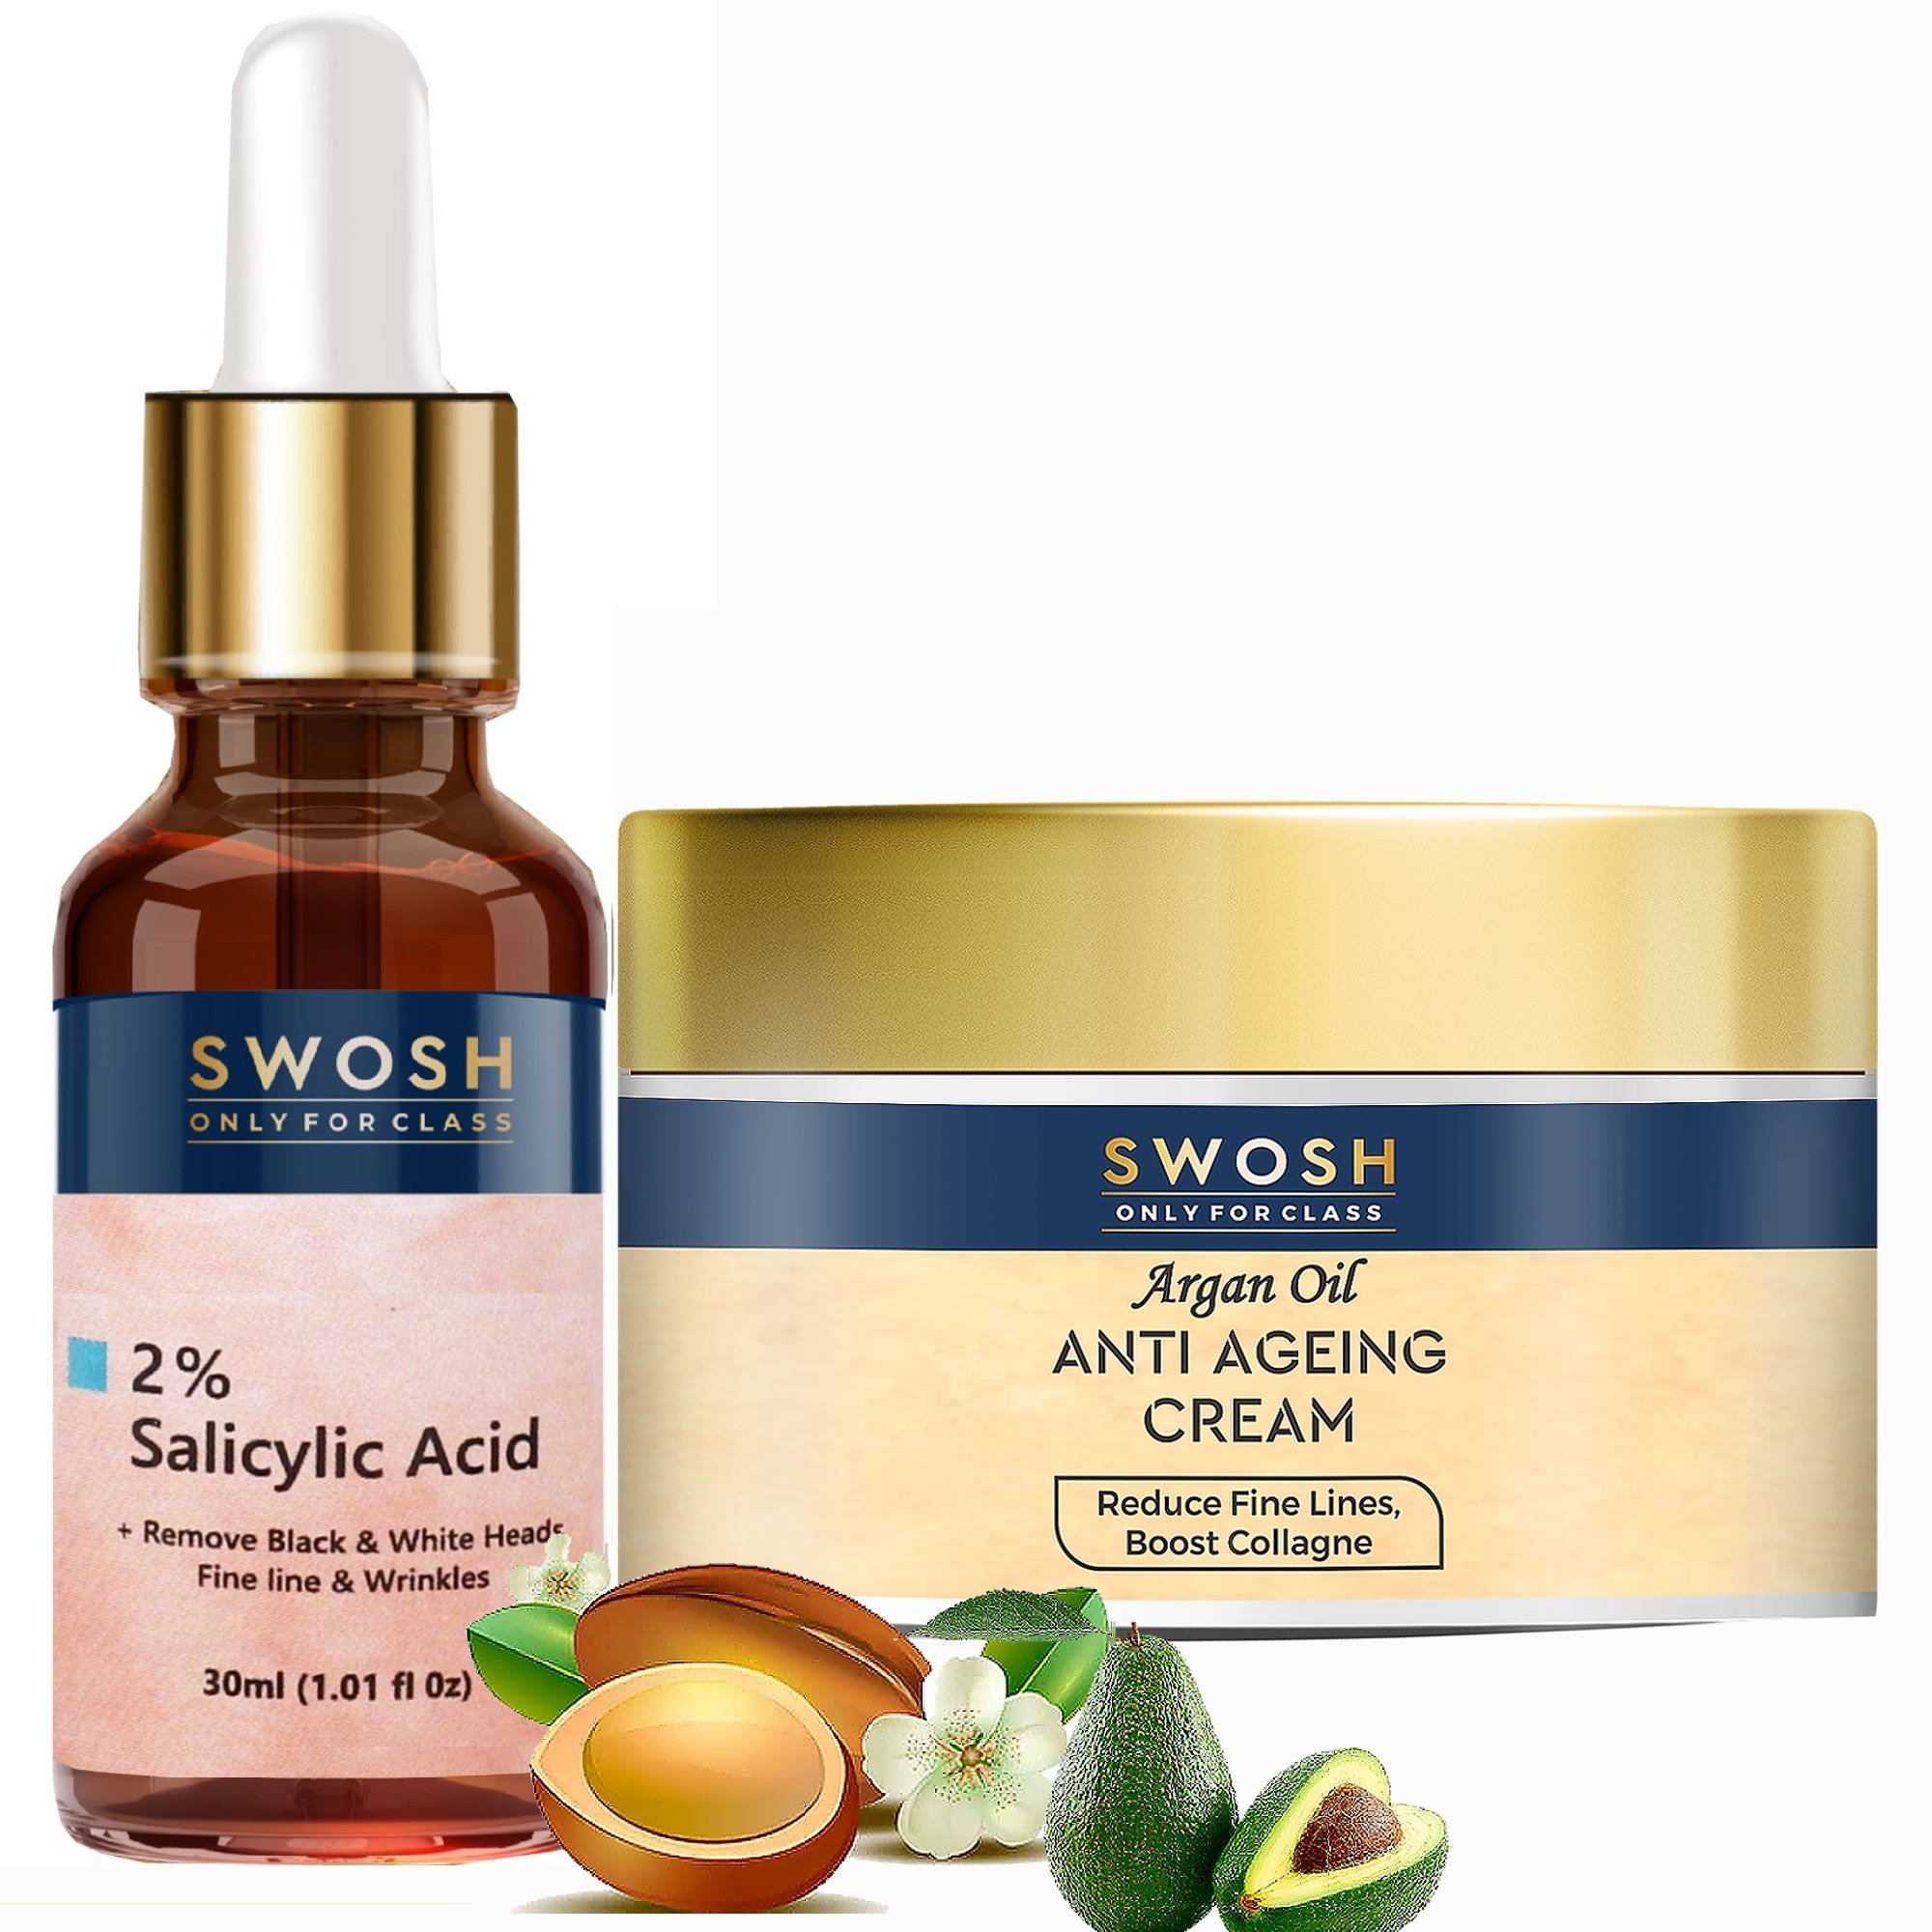 SWOSH Complete Skin Care Combo  | Anti Ageing Face Cream 50 Gram For Day and Night | 2% Salicylic Acid Serum 30 ML With Glycerin & Aloe Vera  - Reduces Blackheads, Wrinkles, Fine Lines & Pigmentation